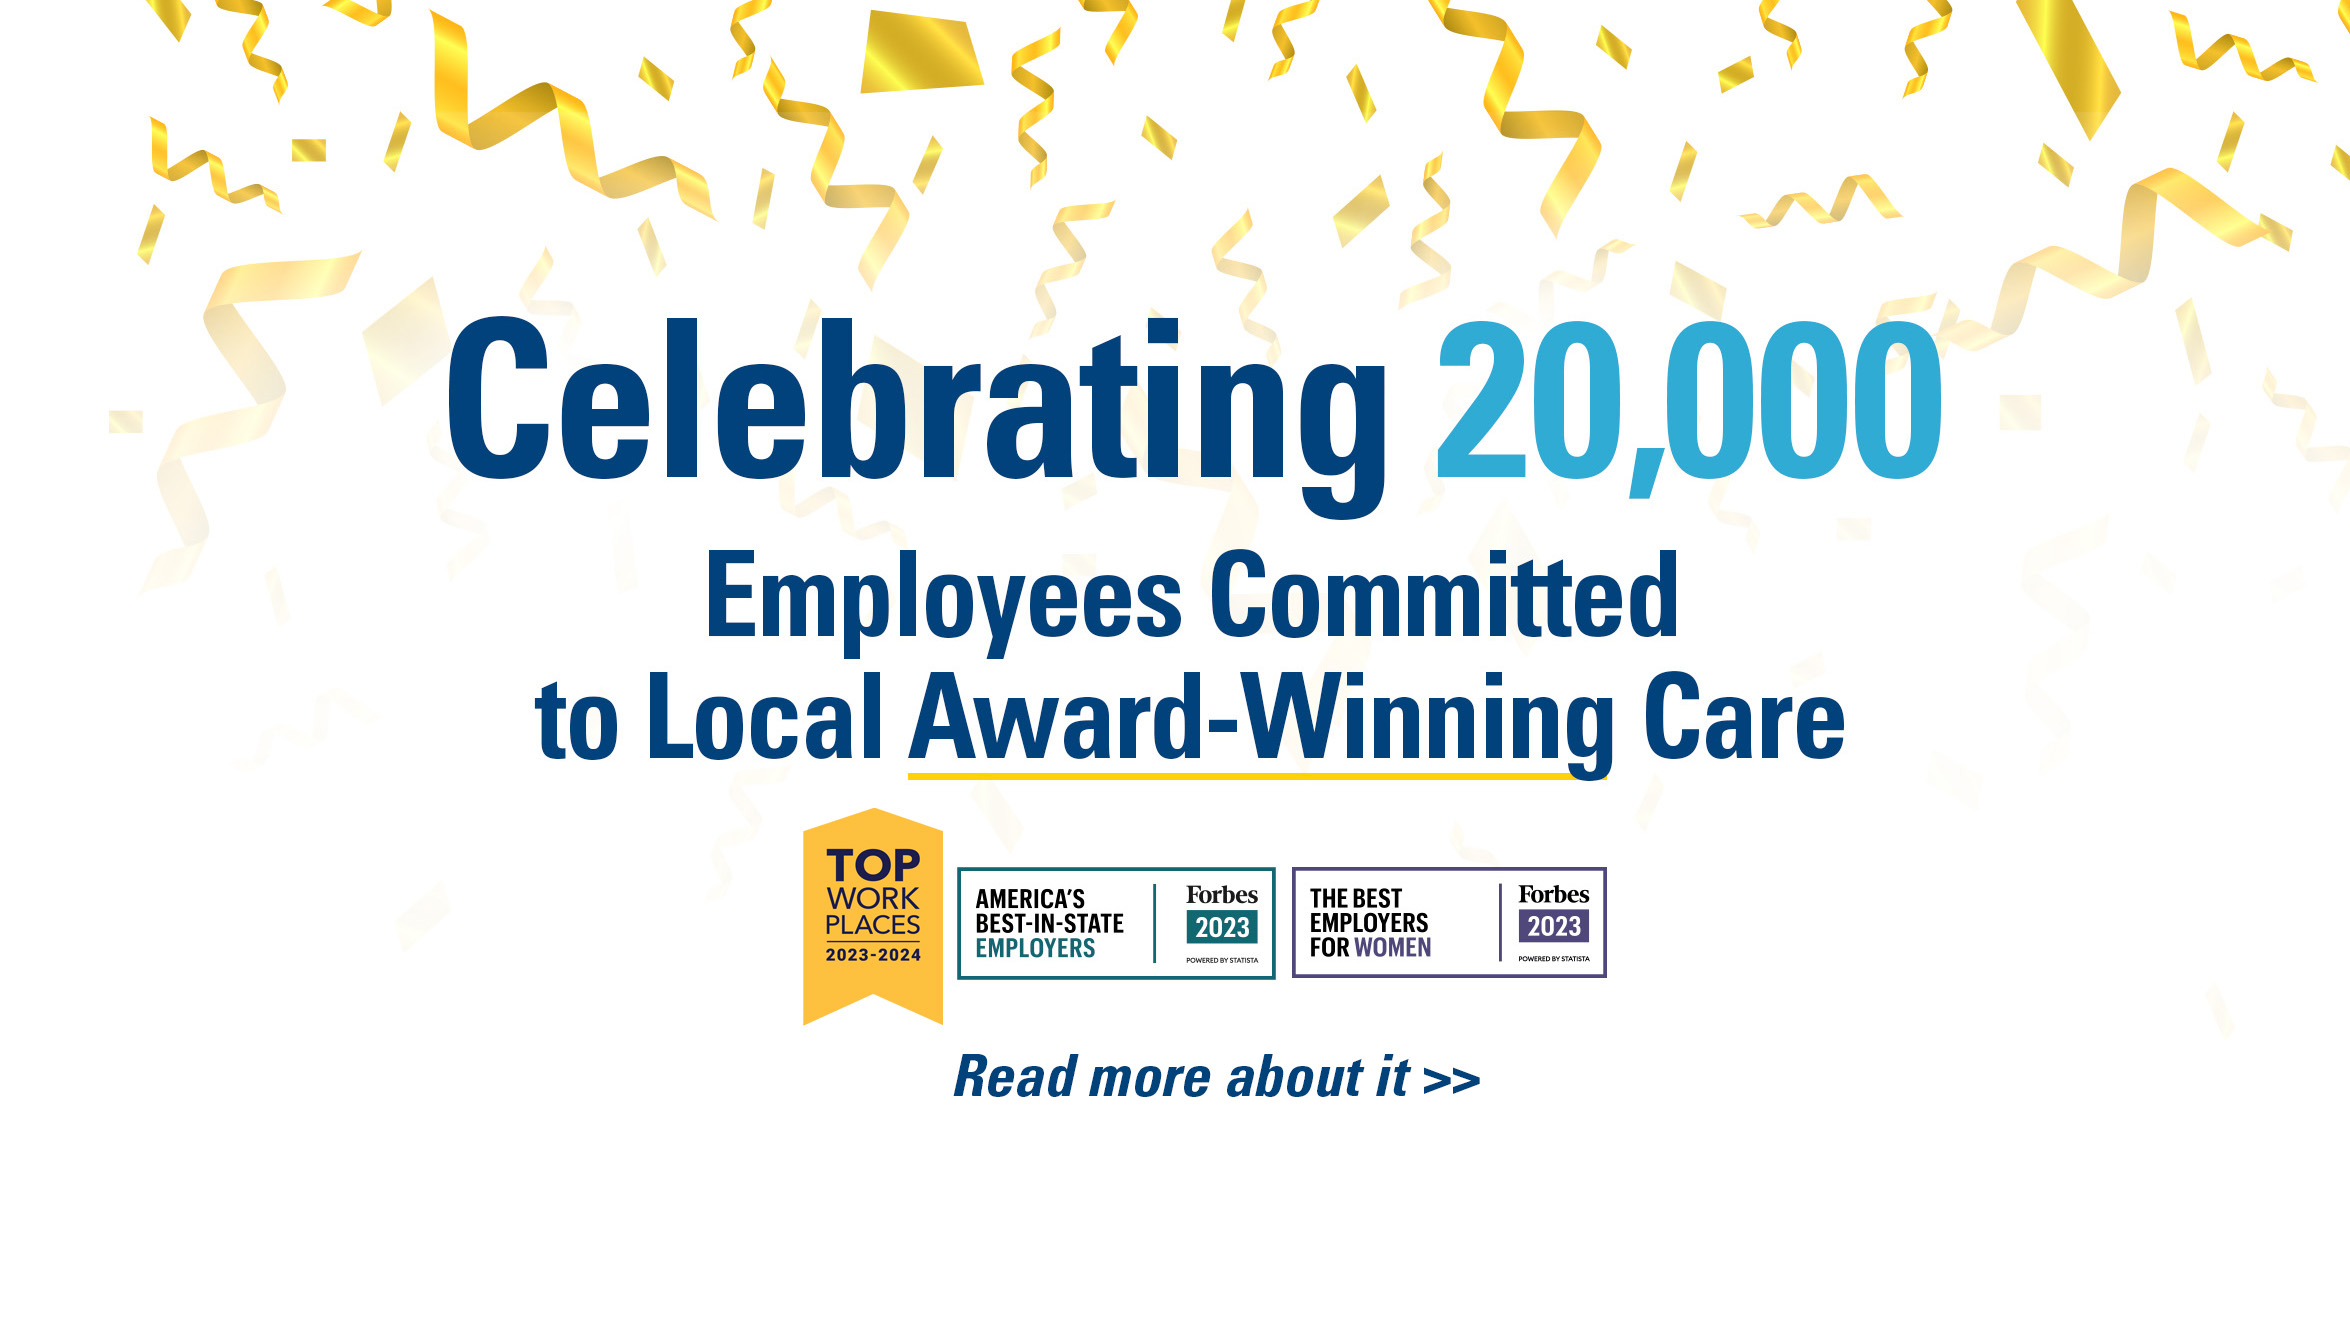 Celebrating 20,000 Employees Committed to Local Award-Winning Care